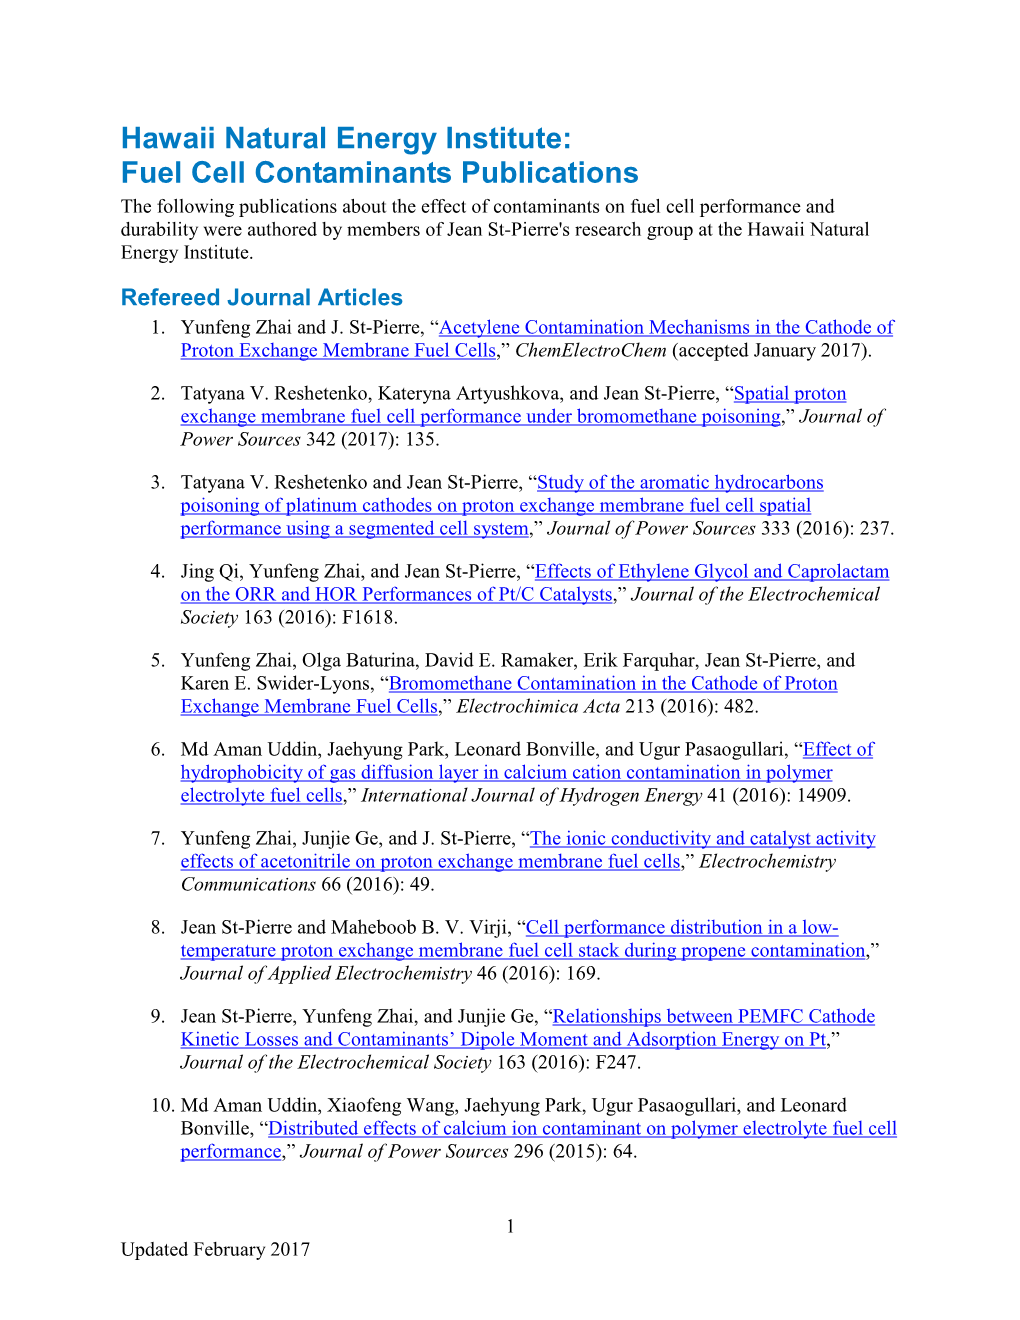 Hawaii Natural Energy Institute: Fuel Cell Contaminants Publications